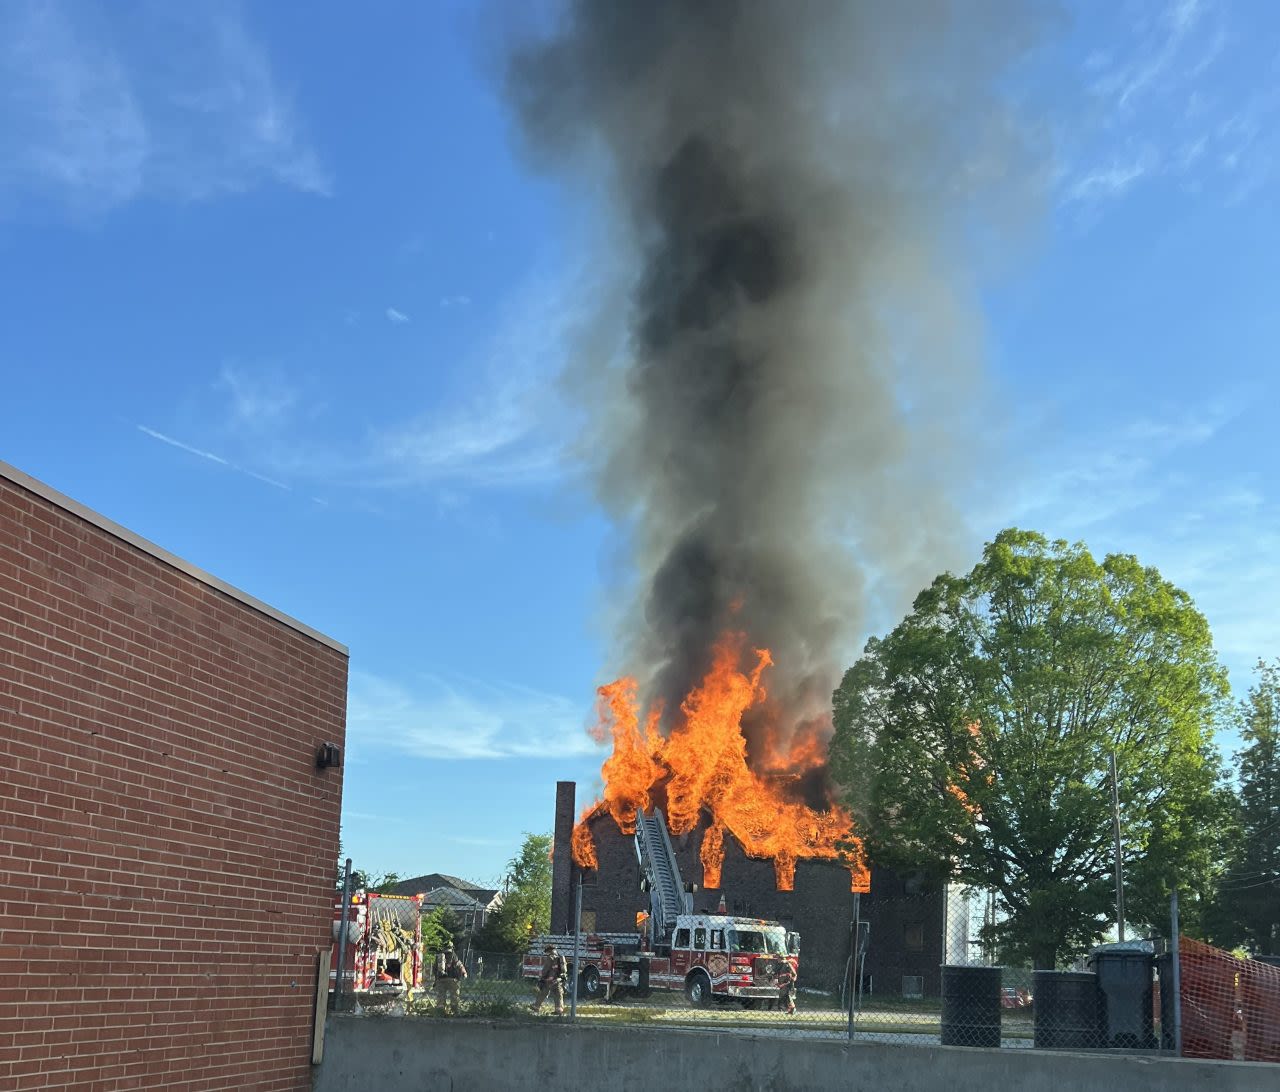 PHOTOS: Durham fire reported at abandoned church